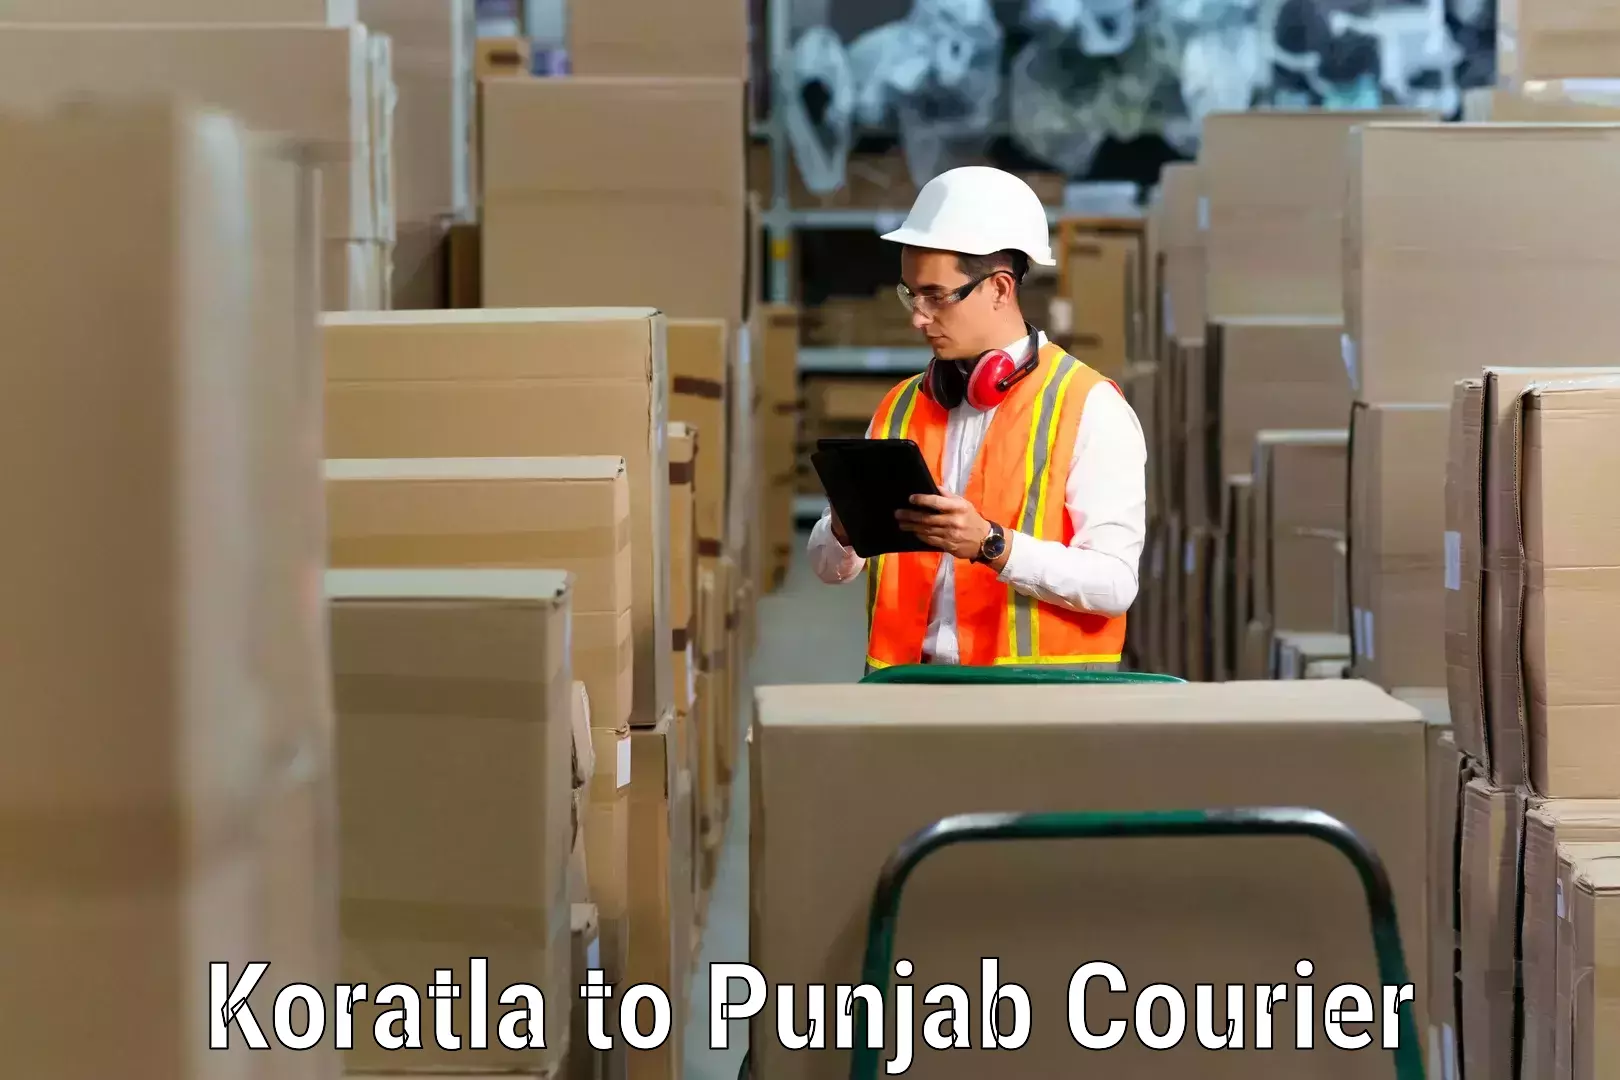 Professional movers and packers Koratla to Punjab